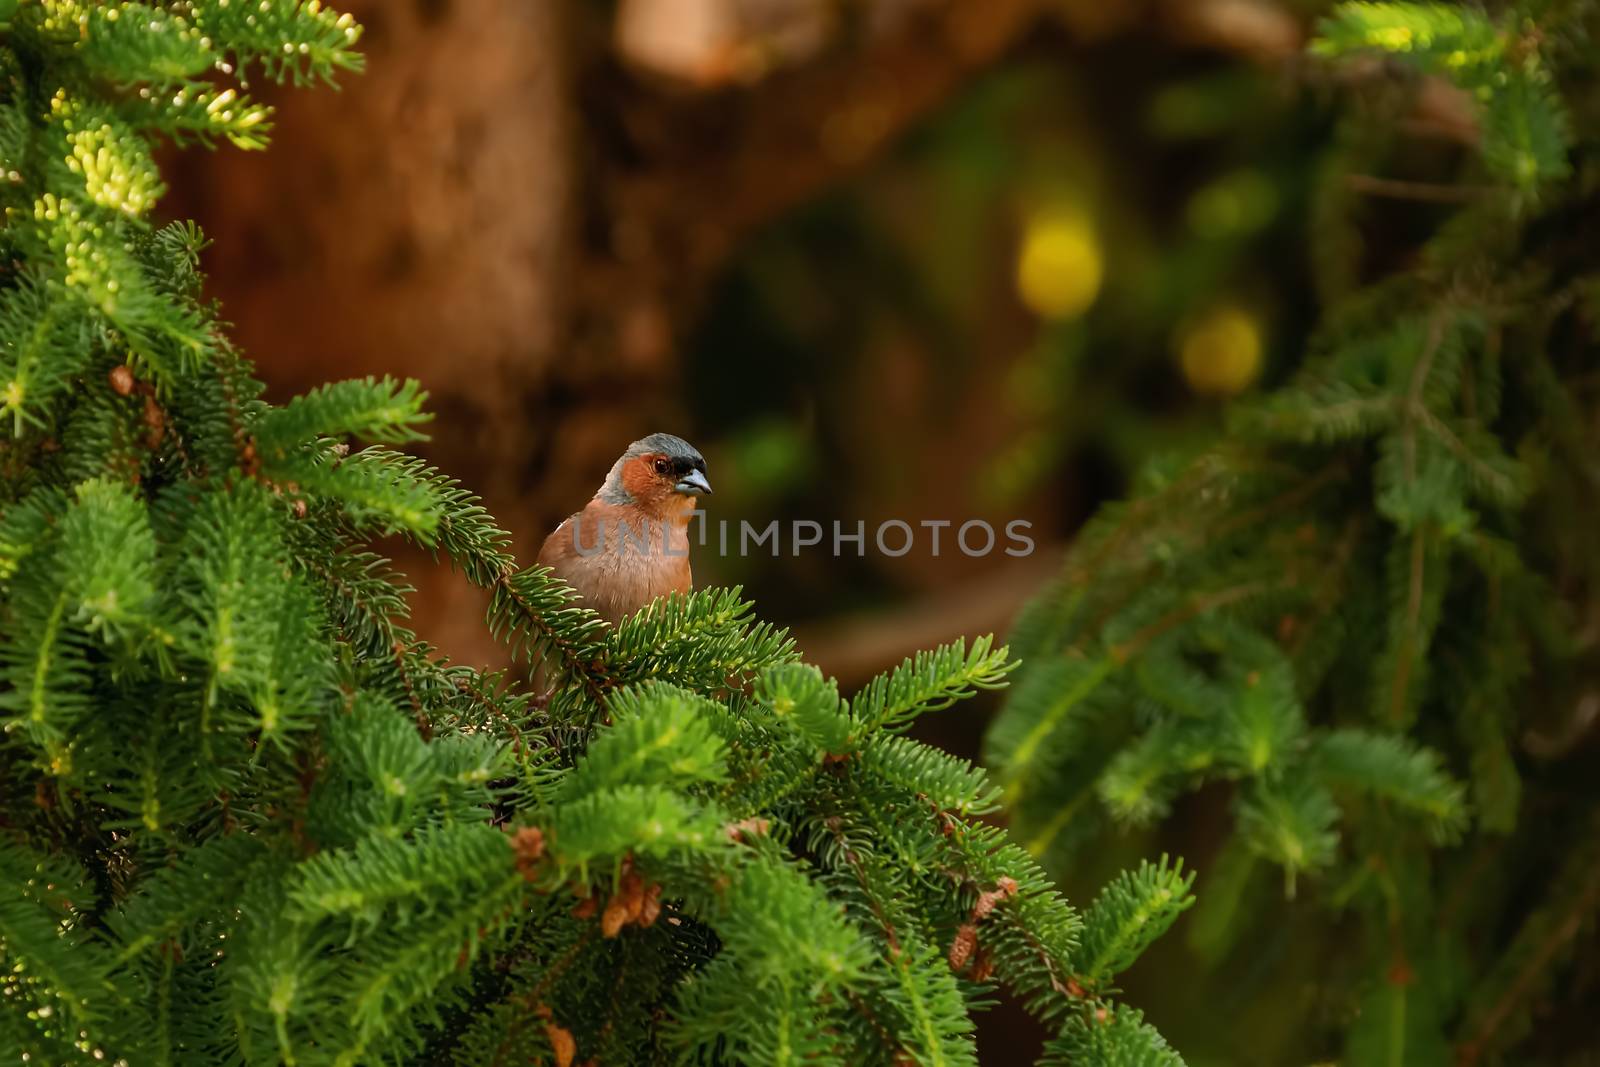 Common chaffinch is perched on a fir branch